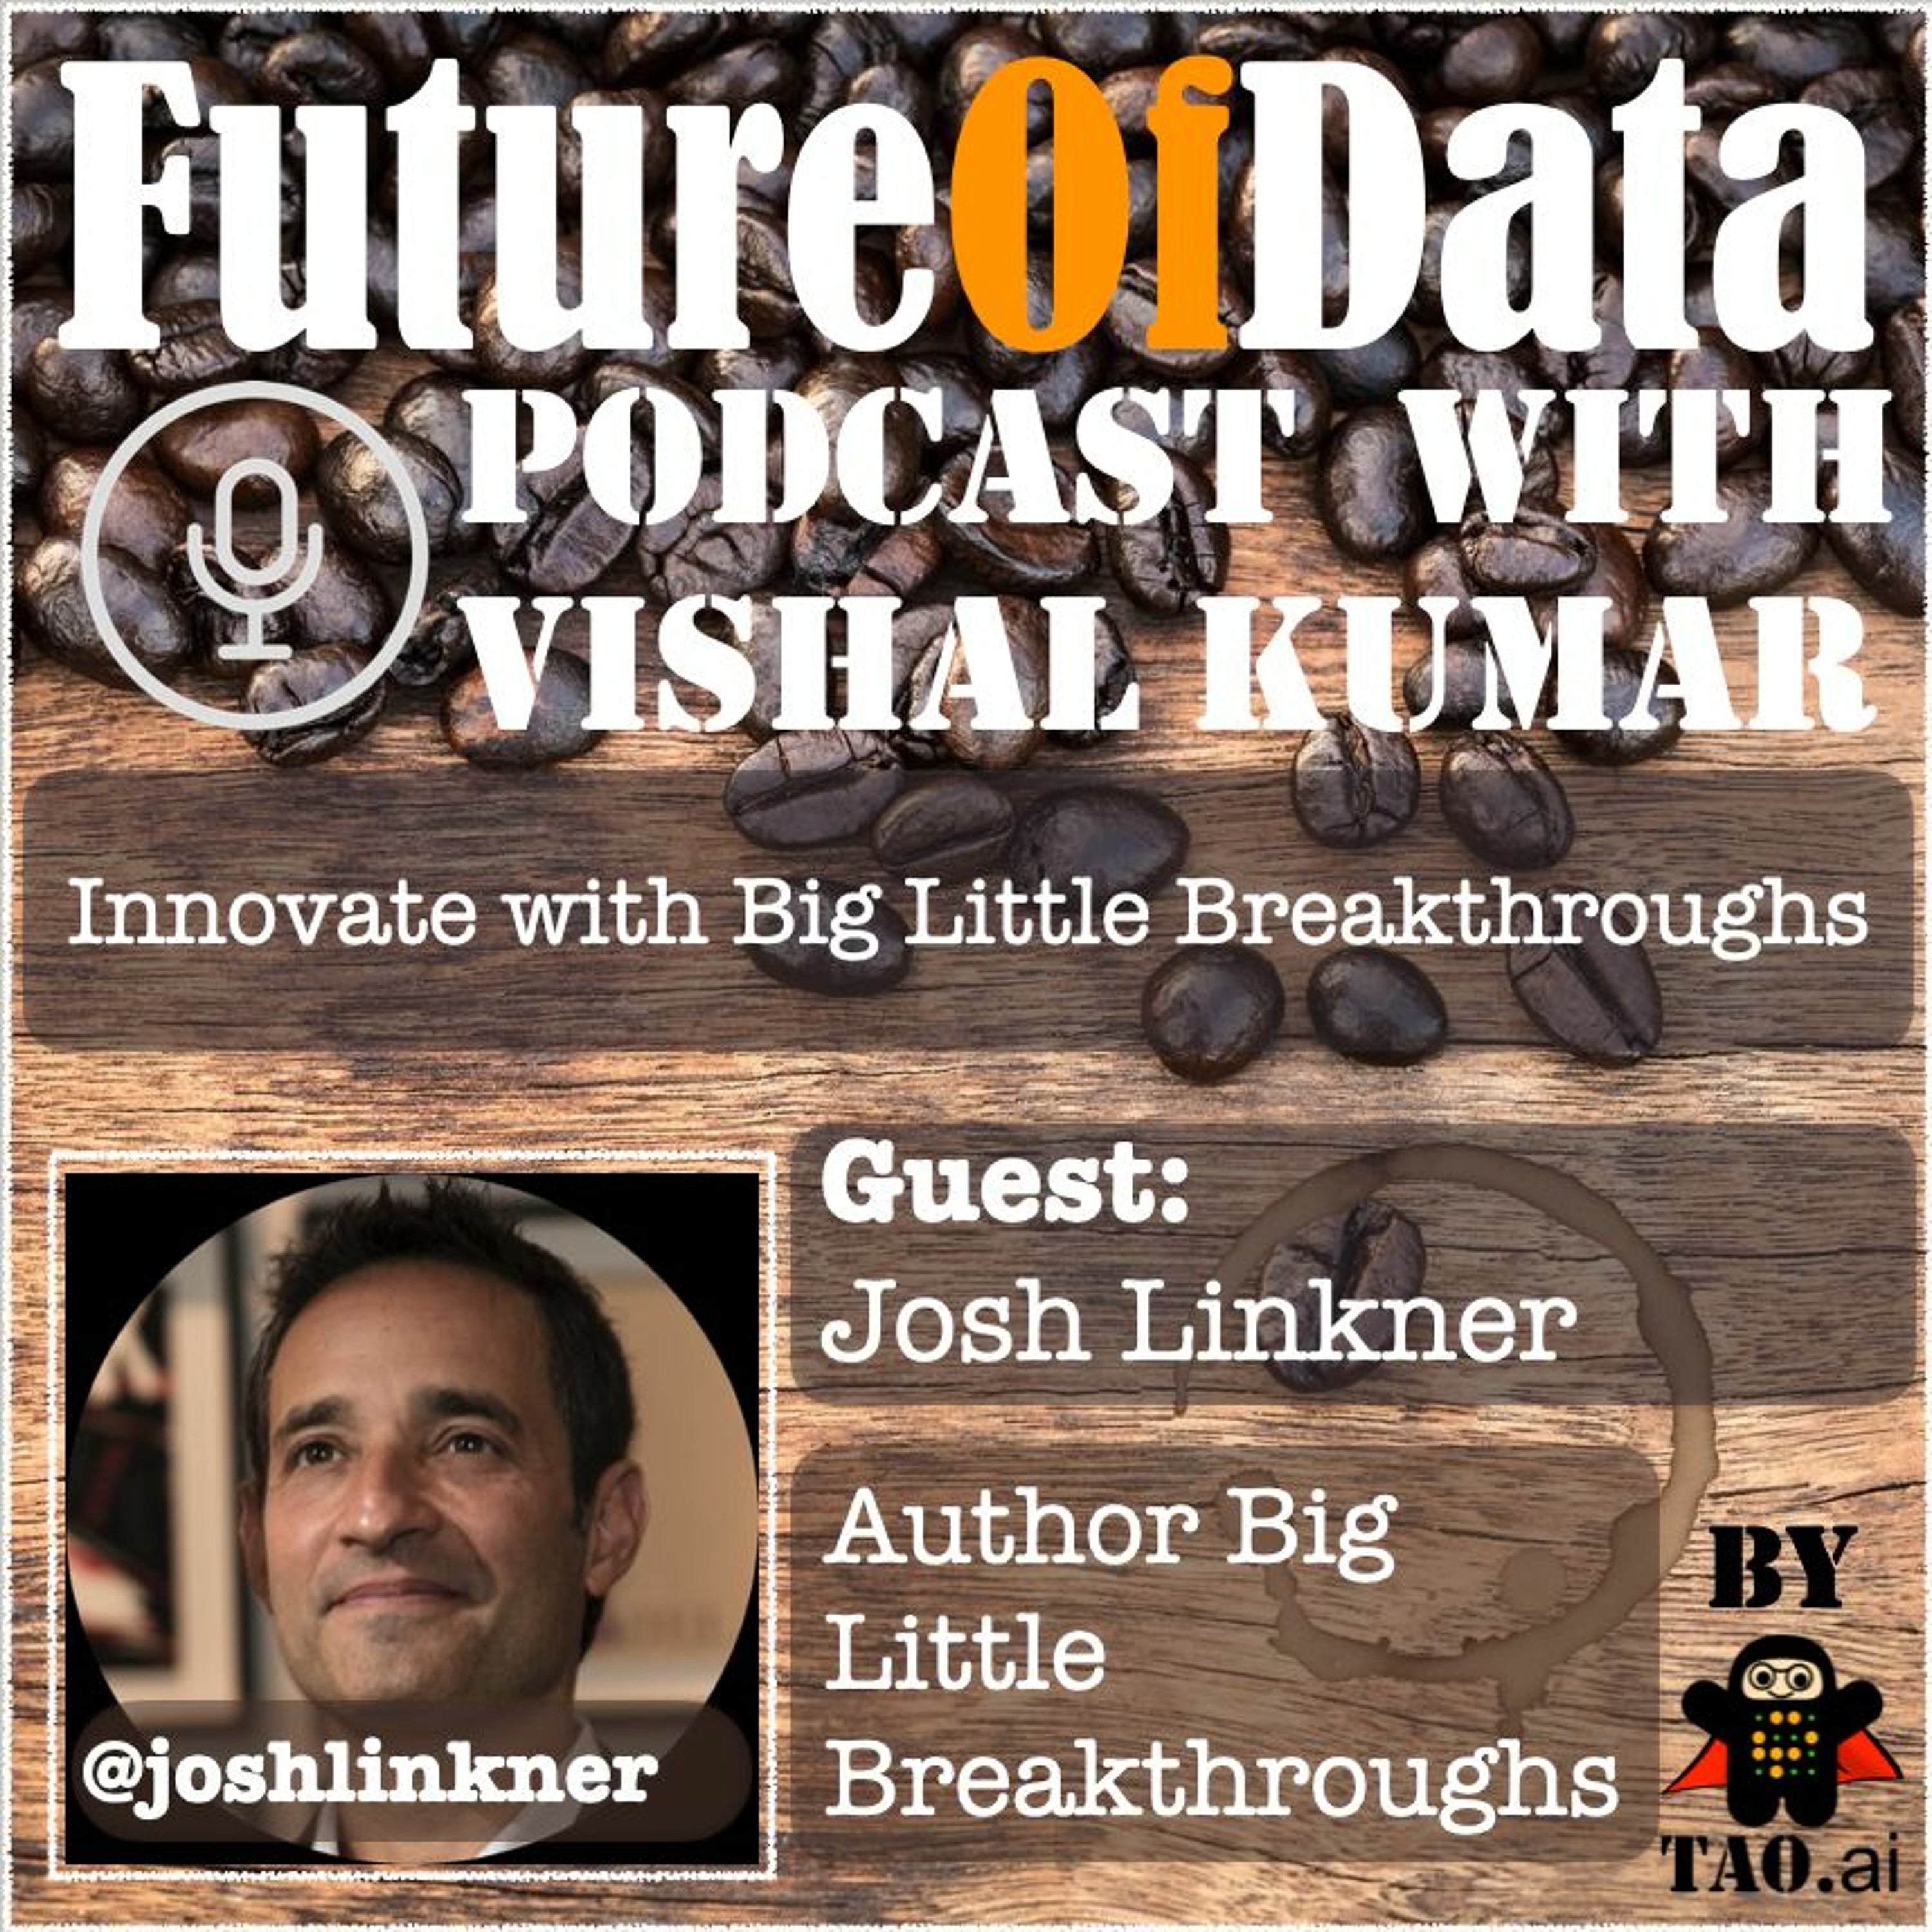 Discussing Data, Innovation, and Creativity with Josh Linkner